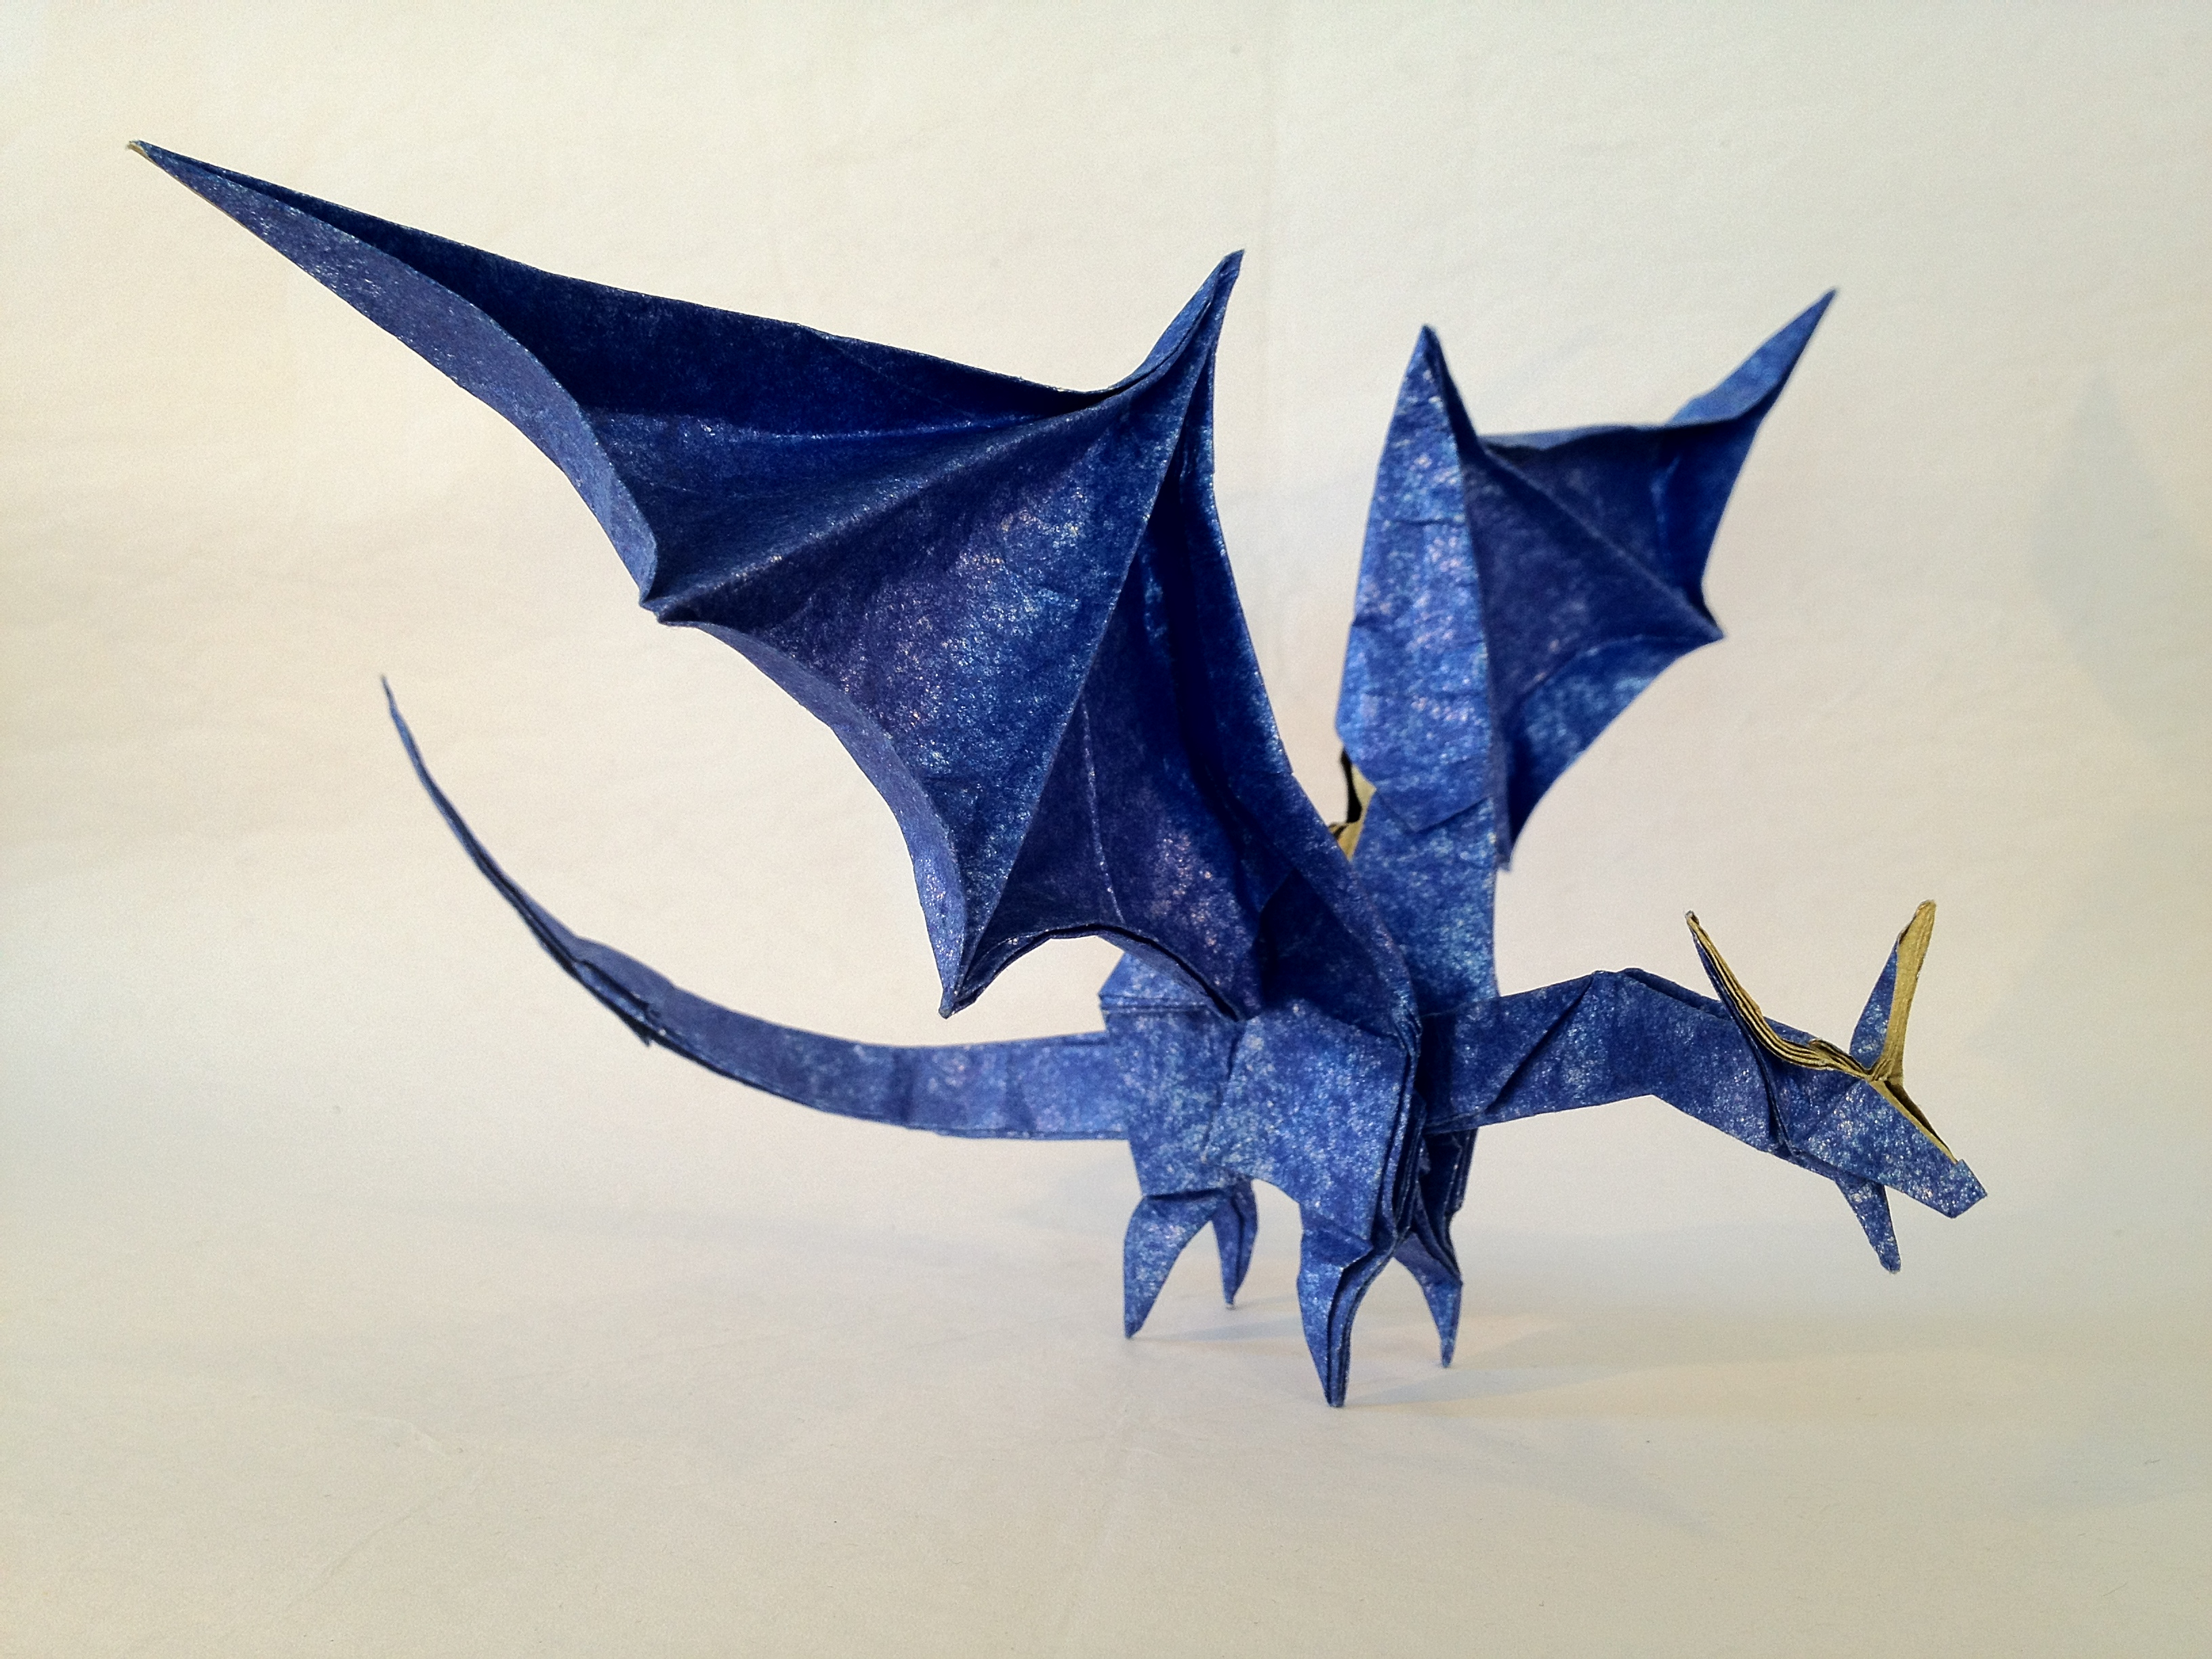 Easy Origami Dragon Step By Step How To Make An Origami Simple Dragon Shuki Kato Youtube Clip